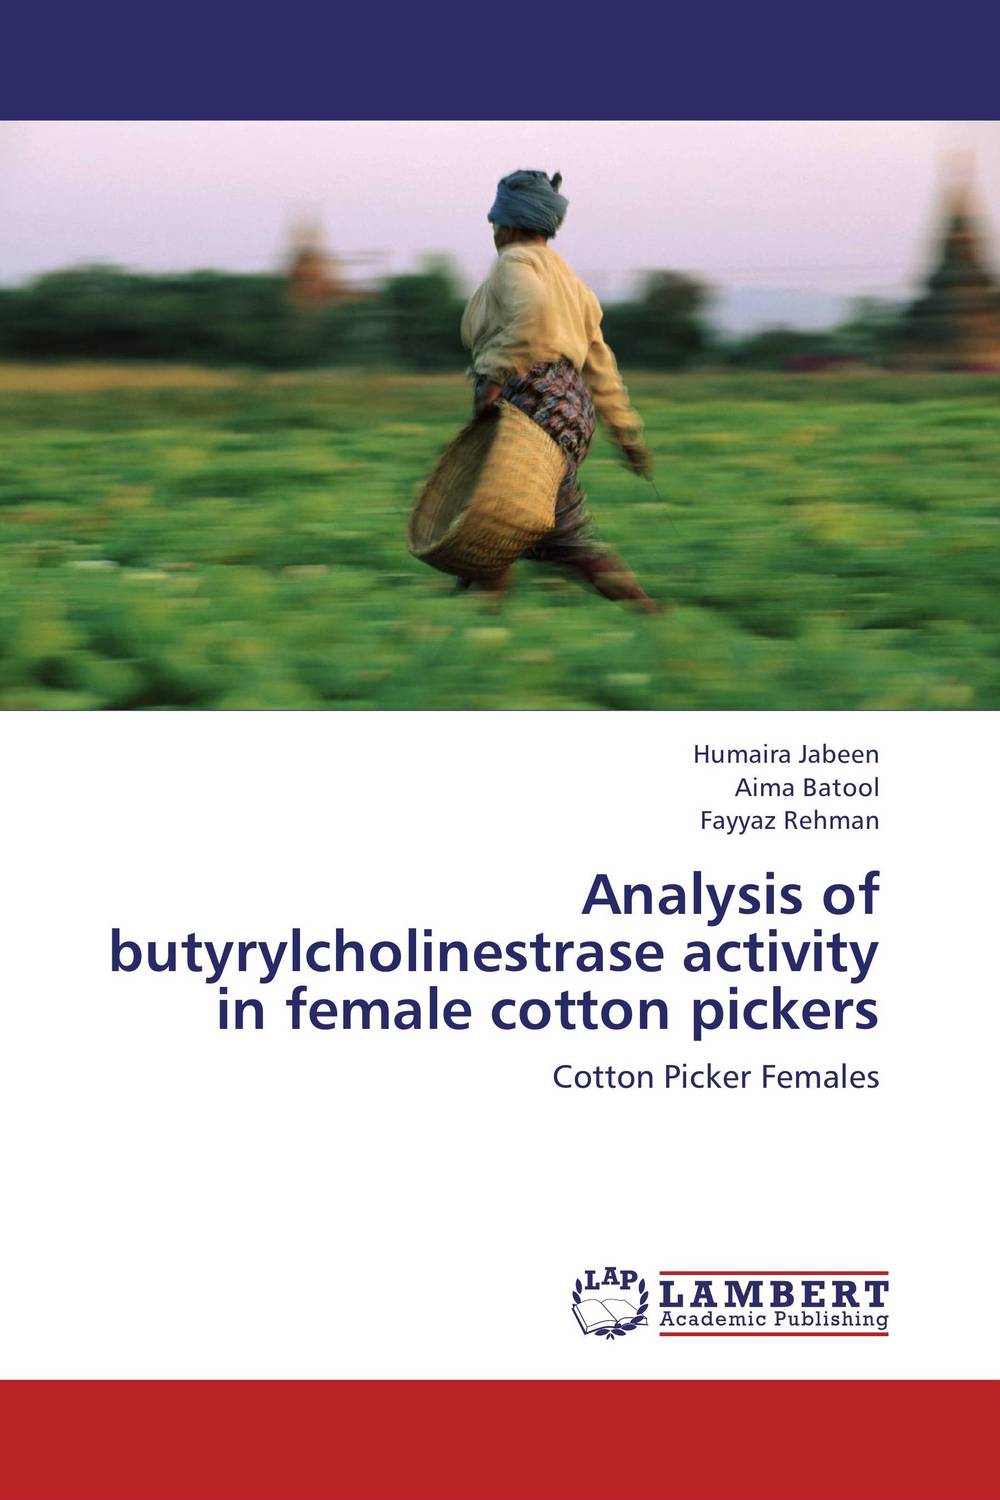 Analysis of butyrylcholinestrase activity in female cotton pickers